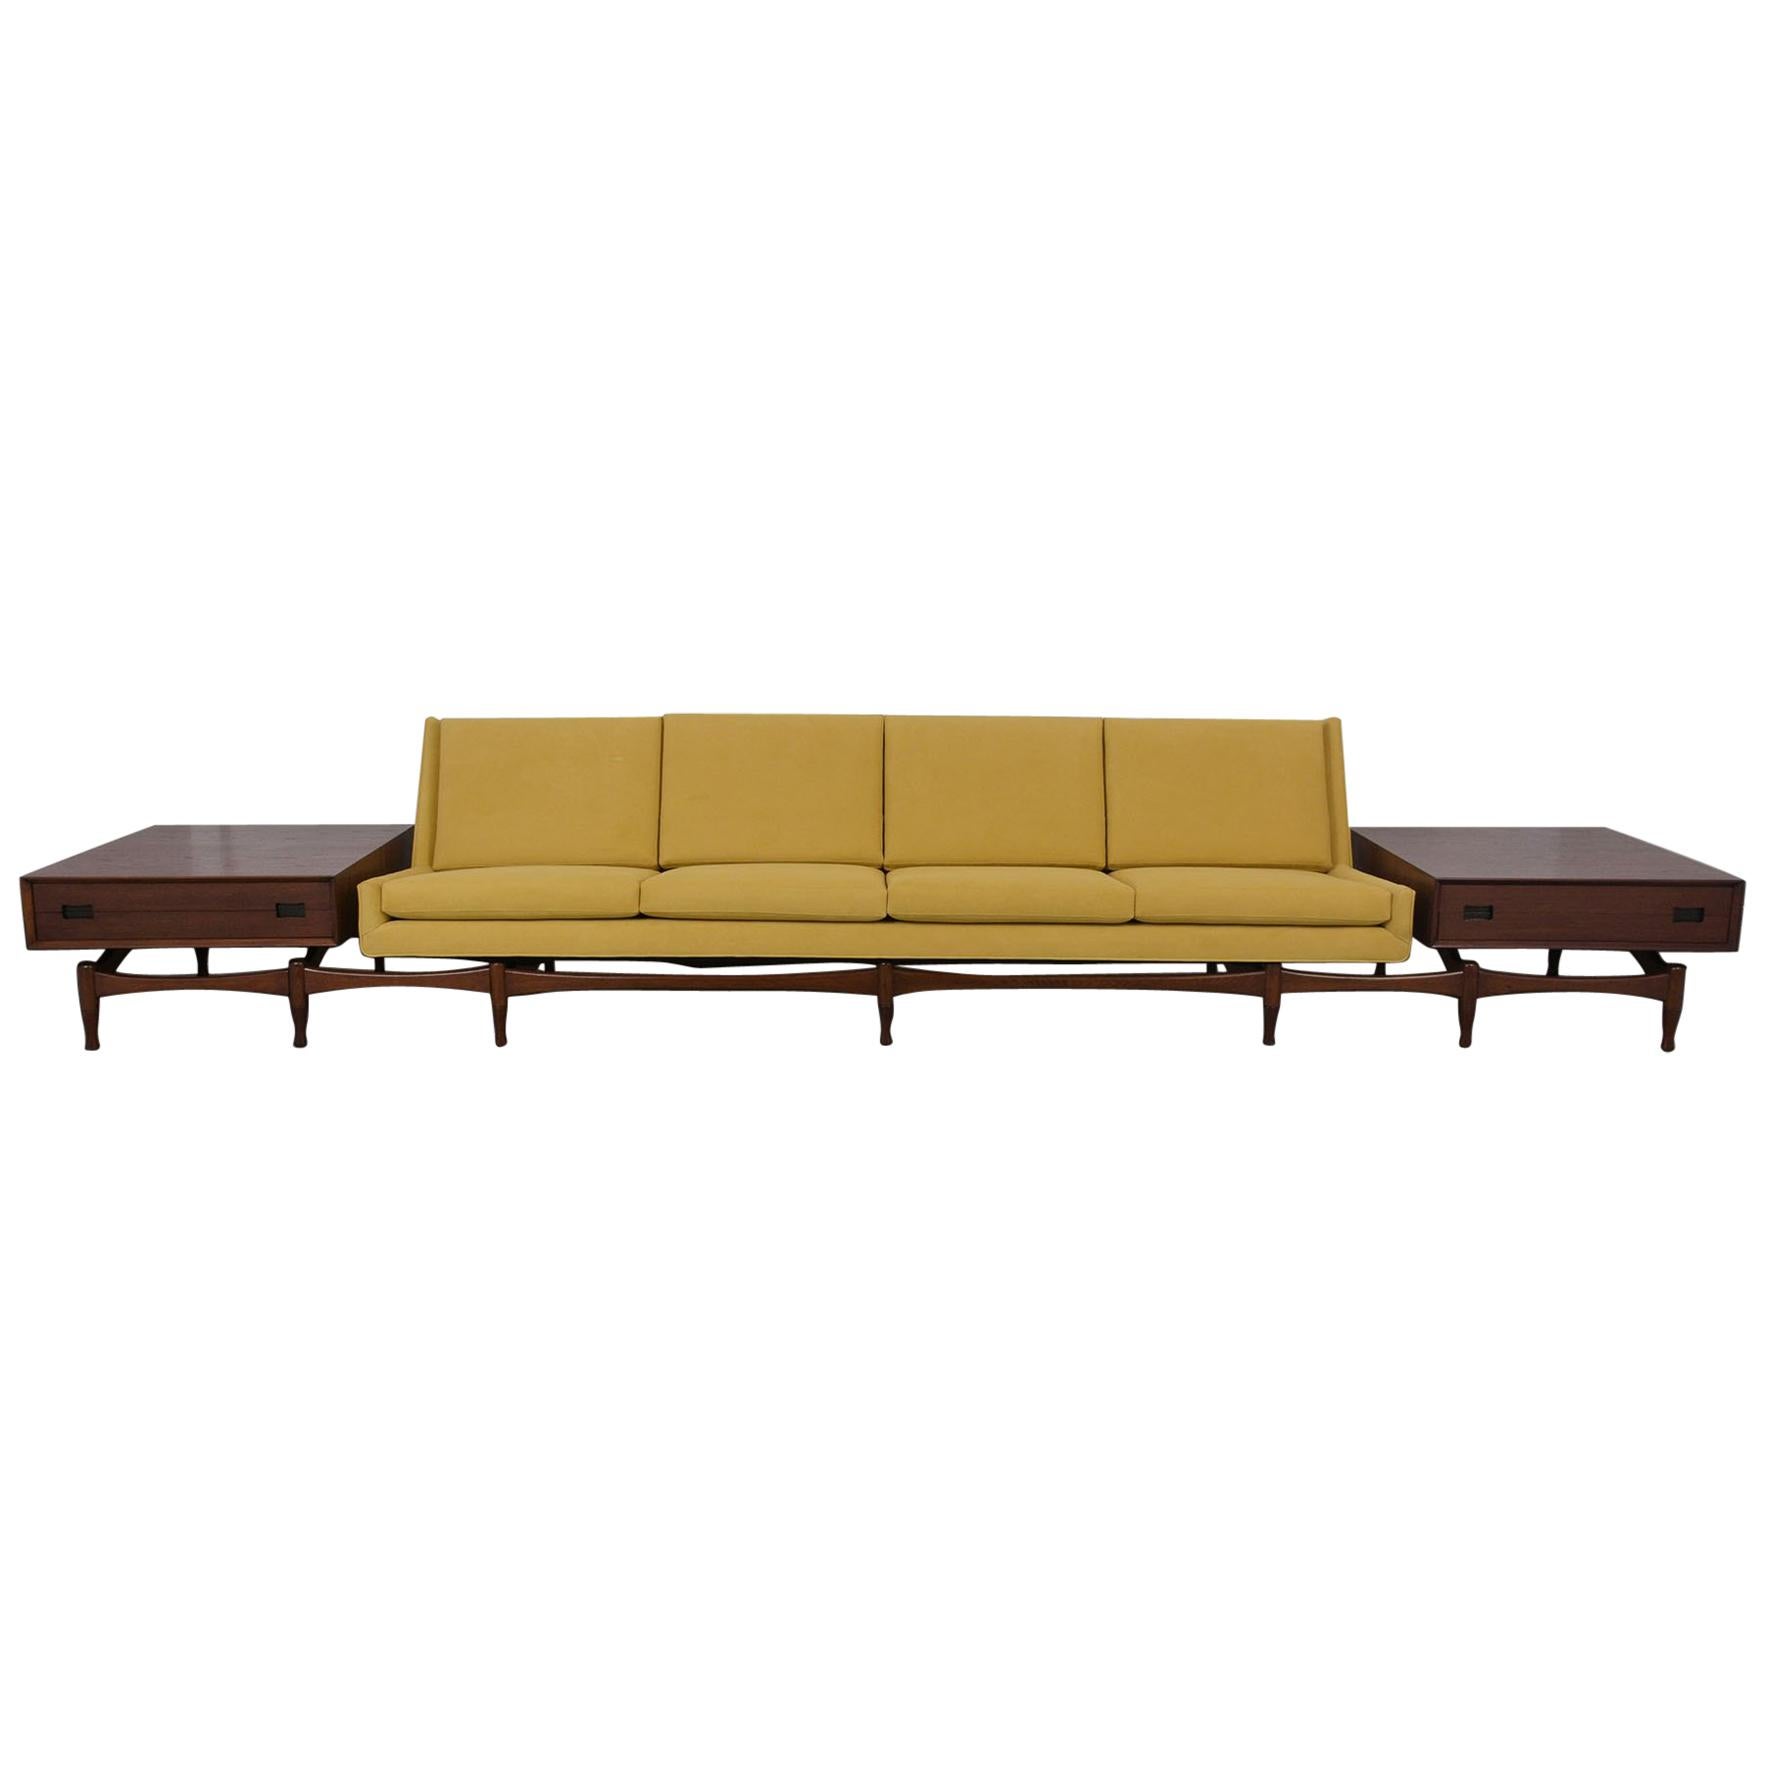 Danish Executive Modern Sofa with Side Tables